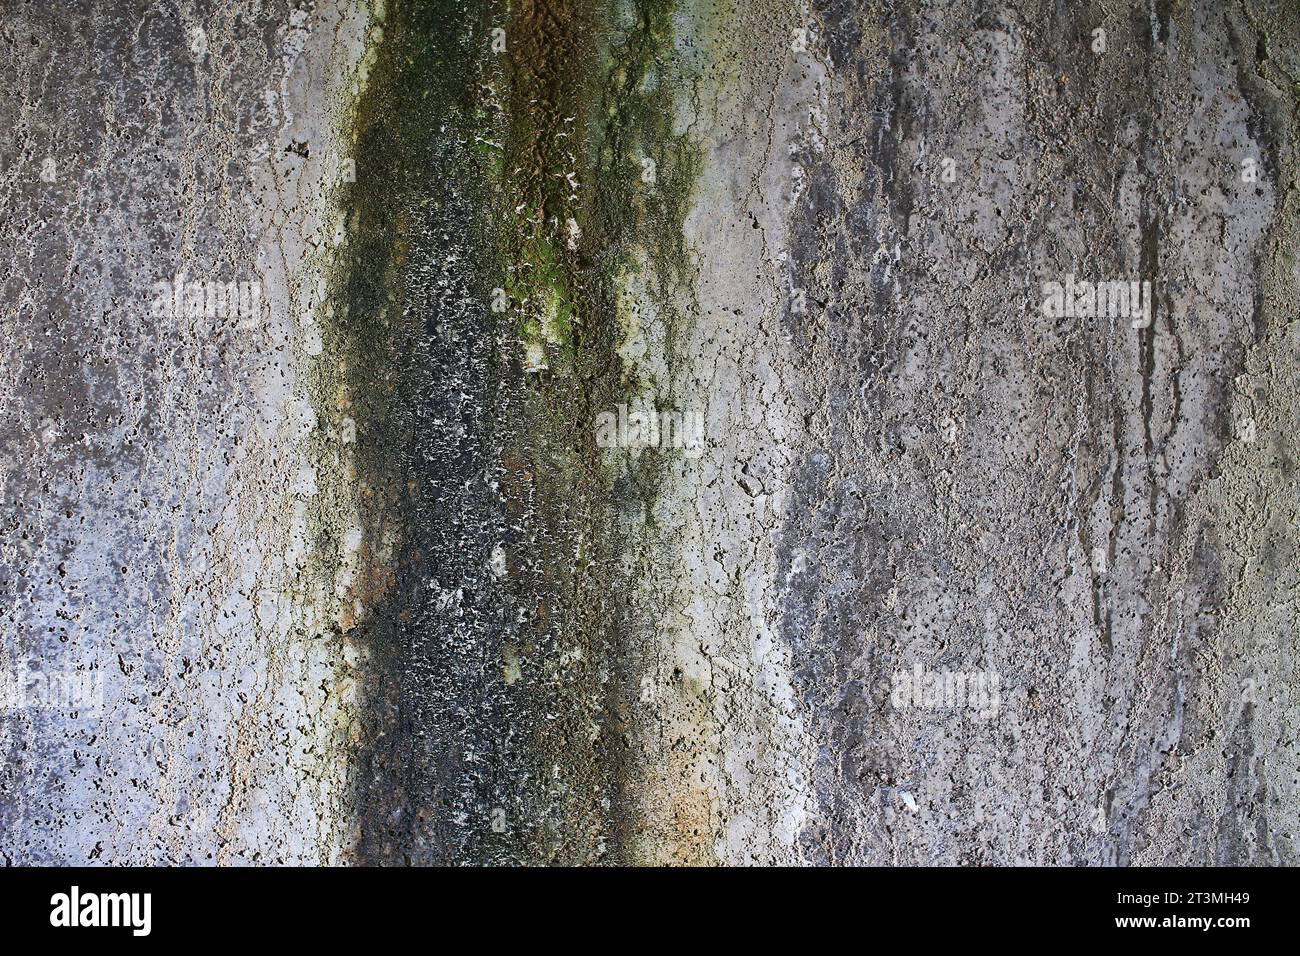 Weathered concrete texture with moss beginning to grow. Stock Photo